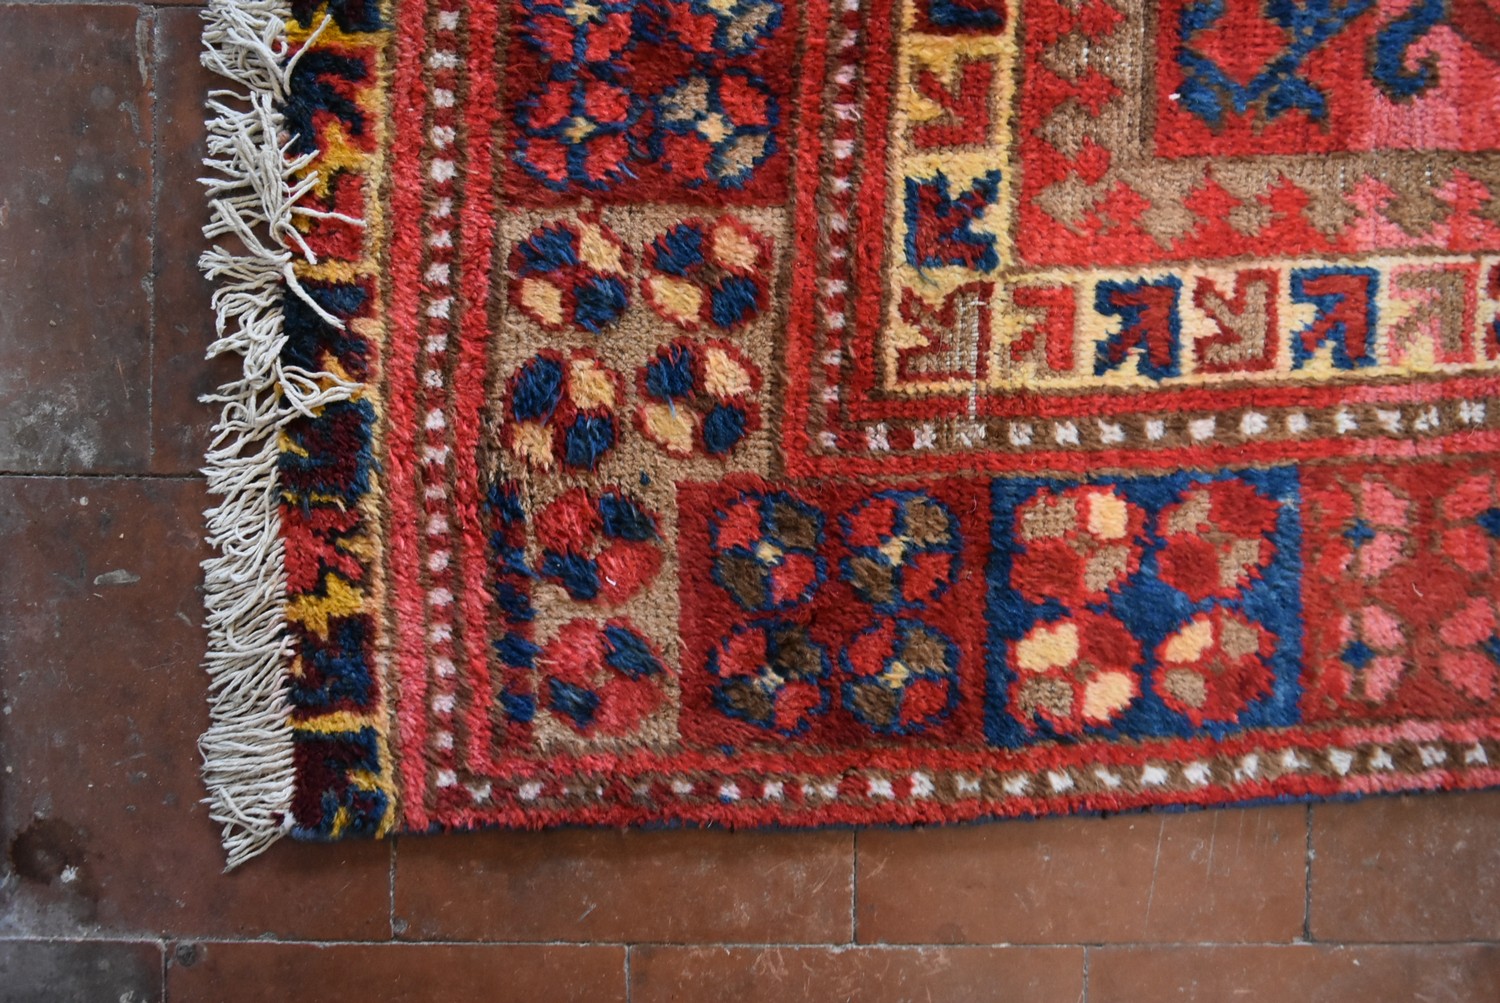 An antique Tabat carpet with repeating gul motifs across the deep red field contained within a - Image 3 of 4